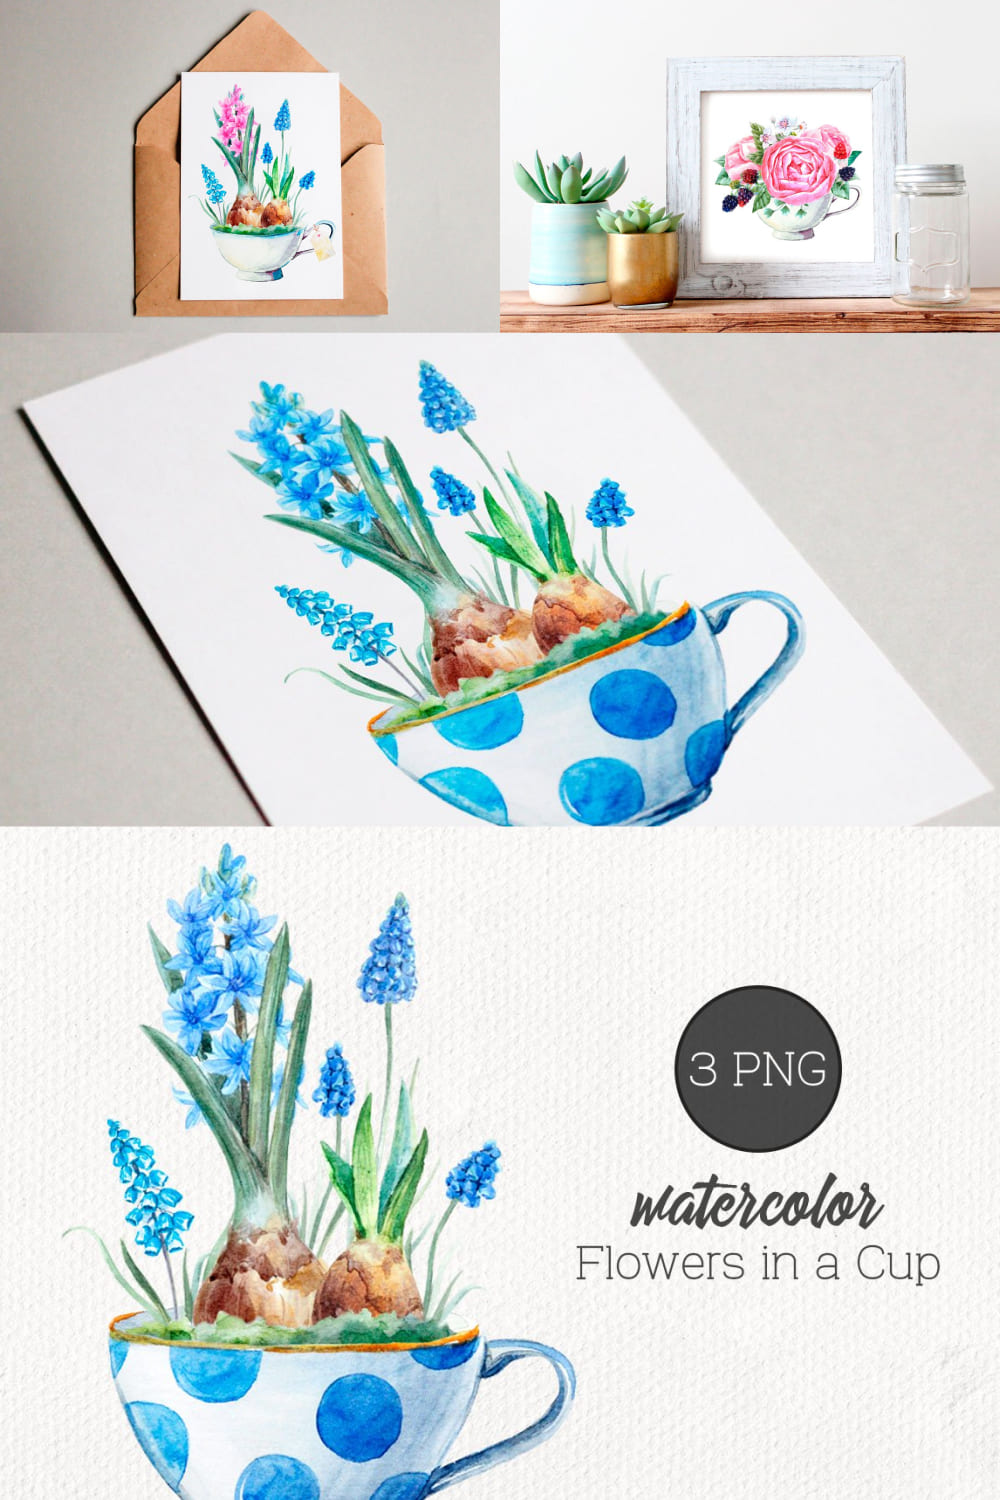 Watercolor Set "Flowers in a Cup" pinterest image.